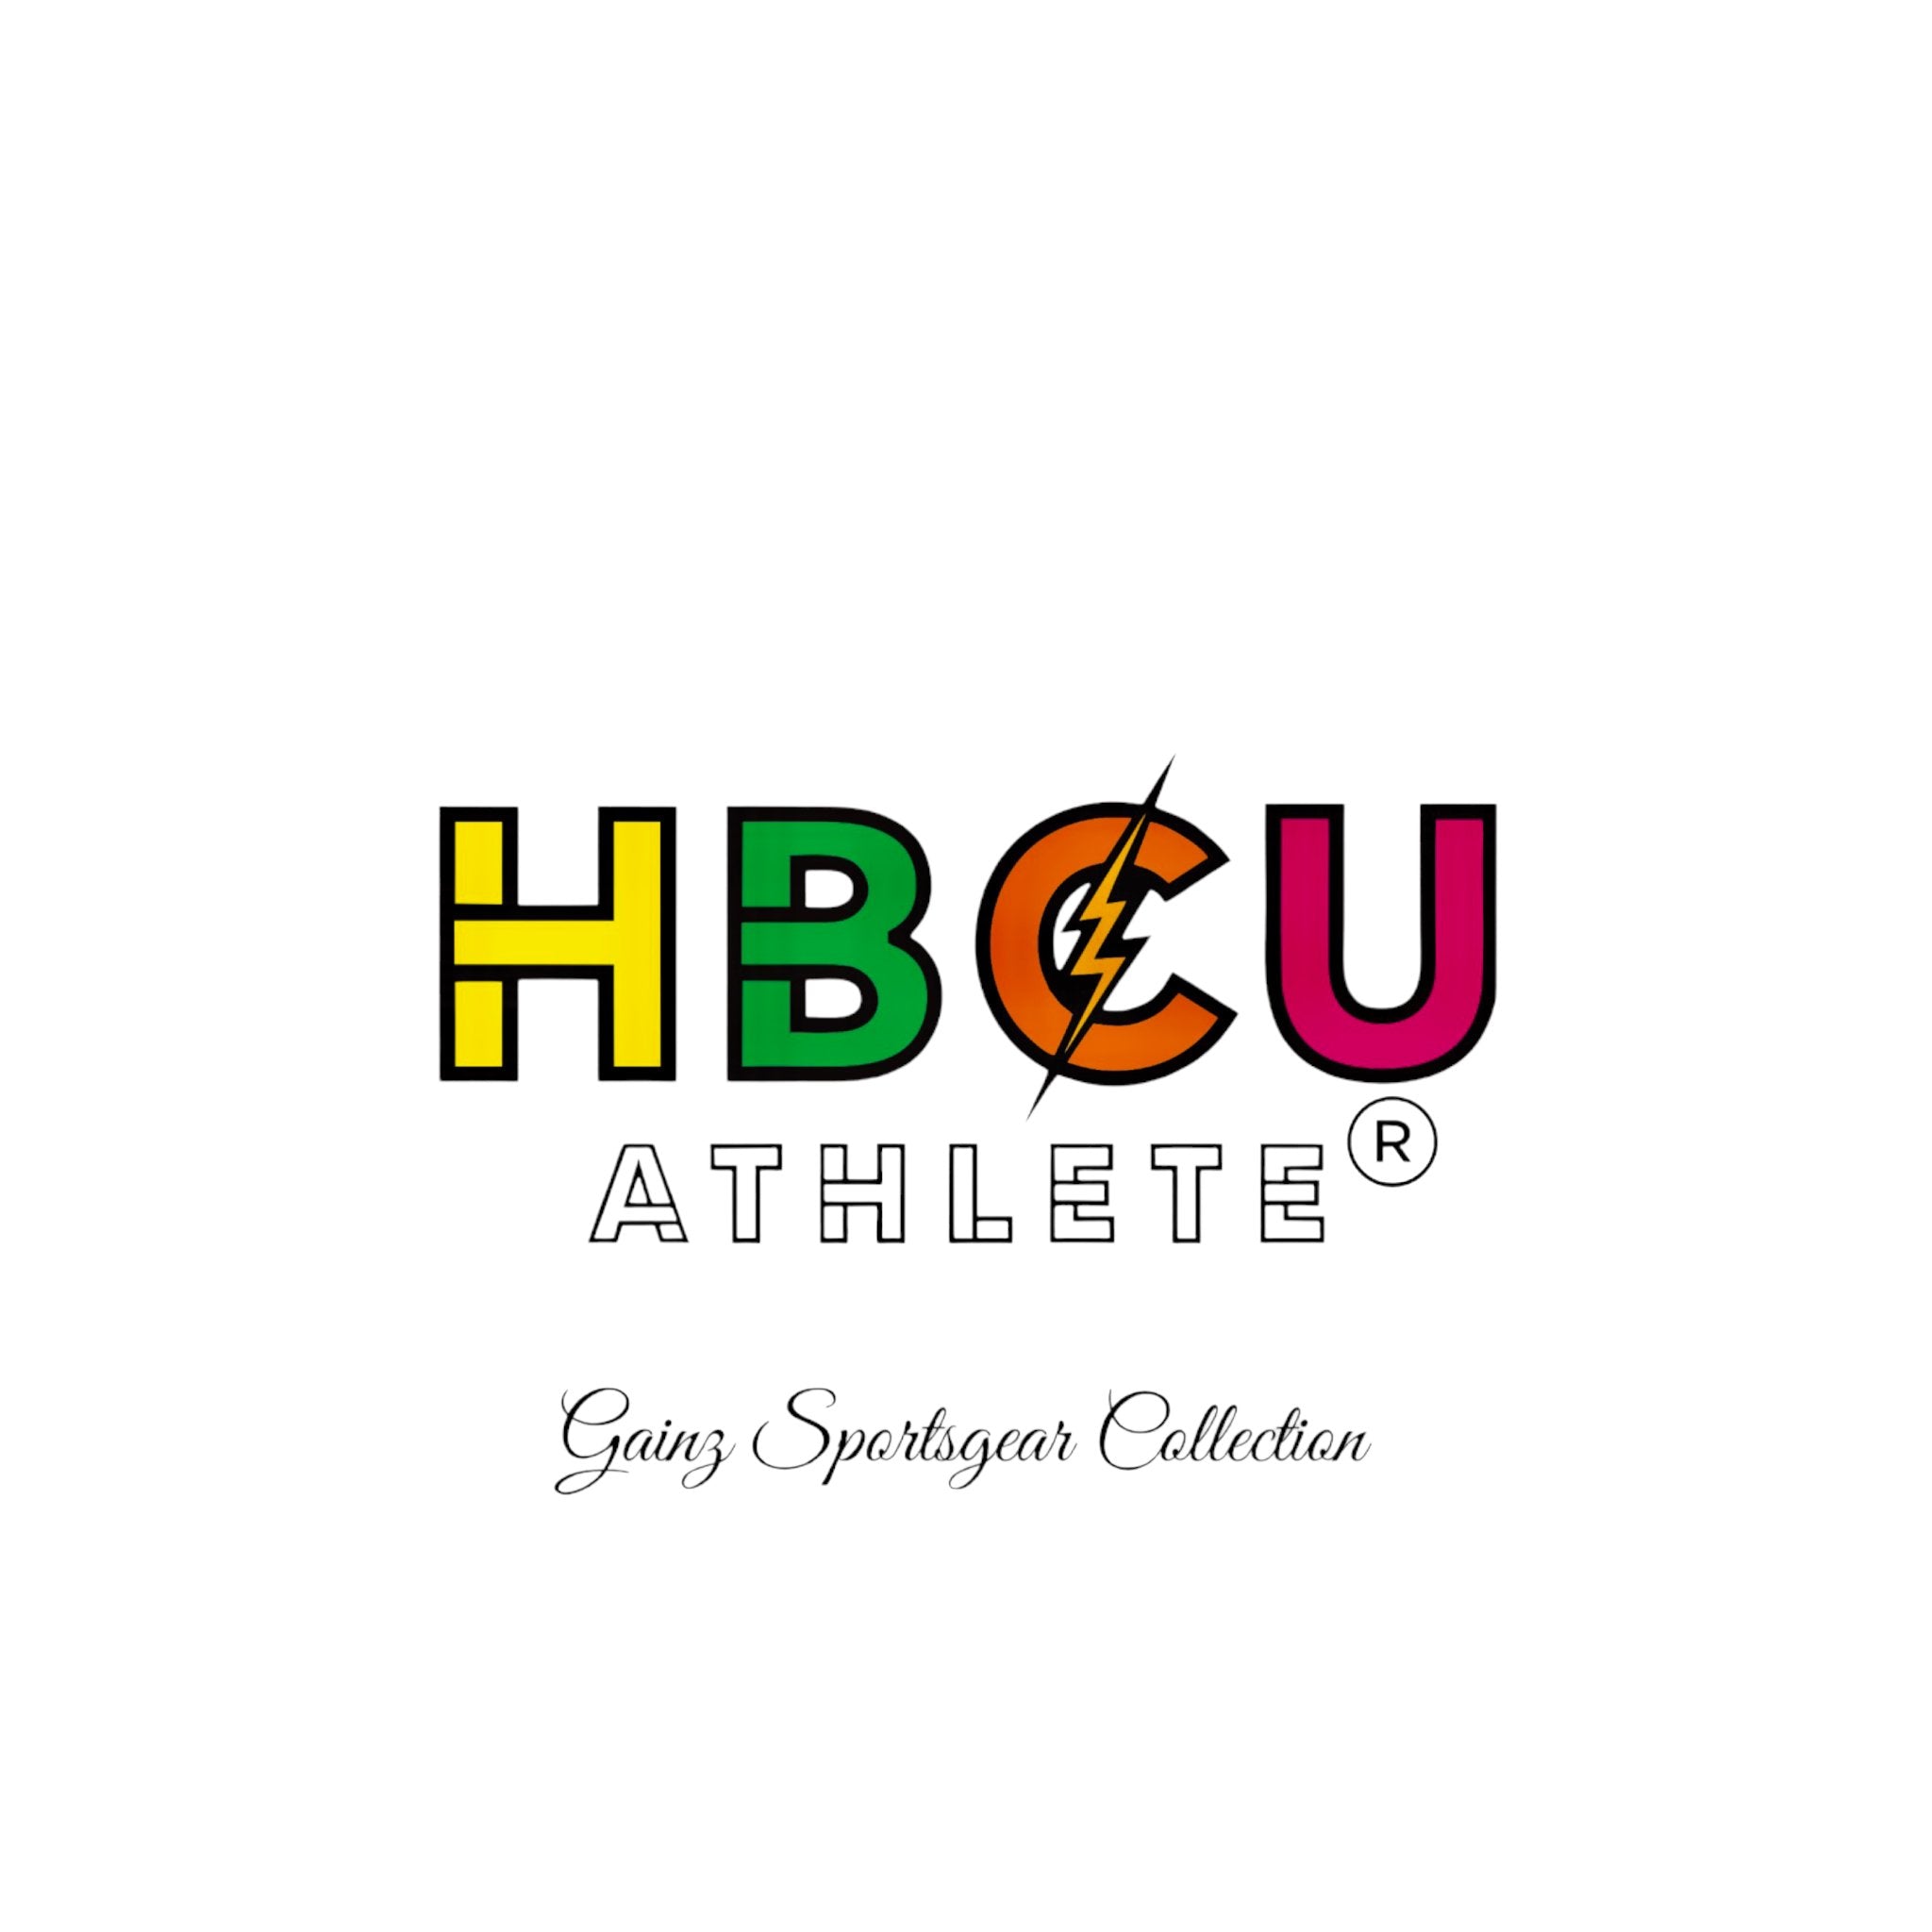 HBCU COLLECTION